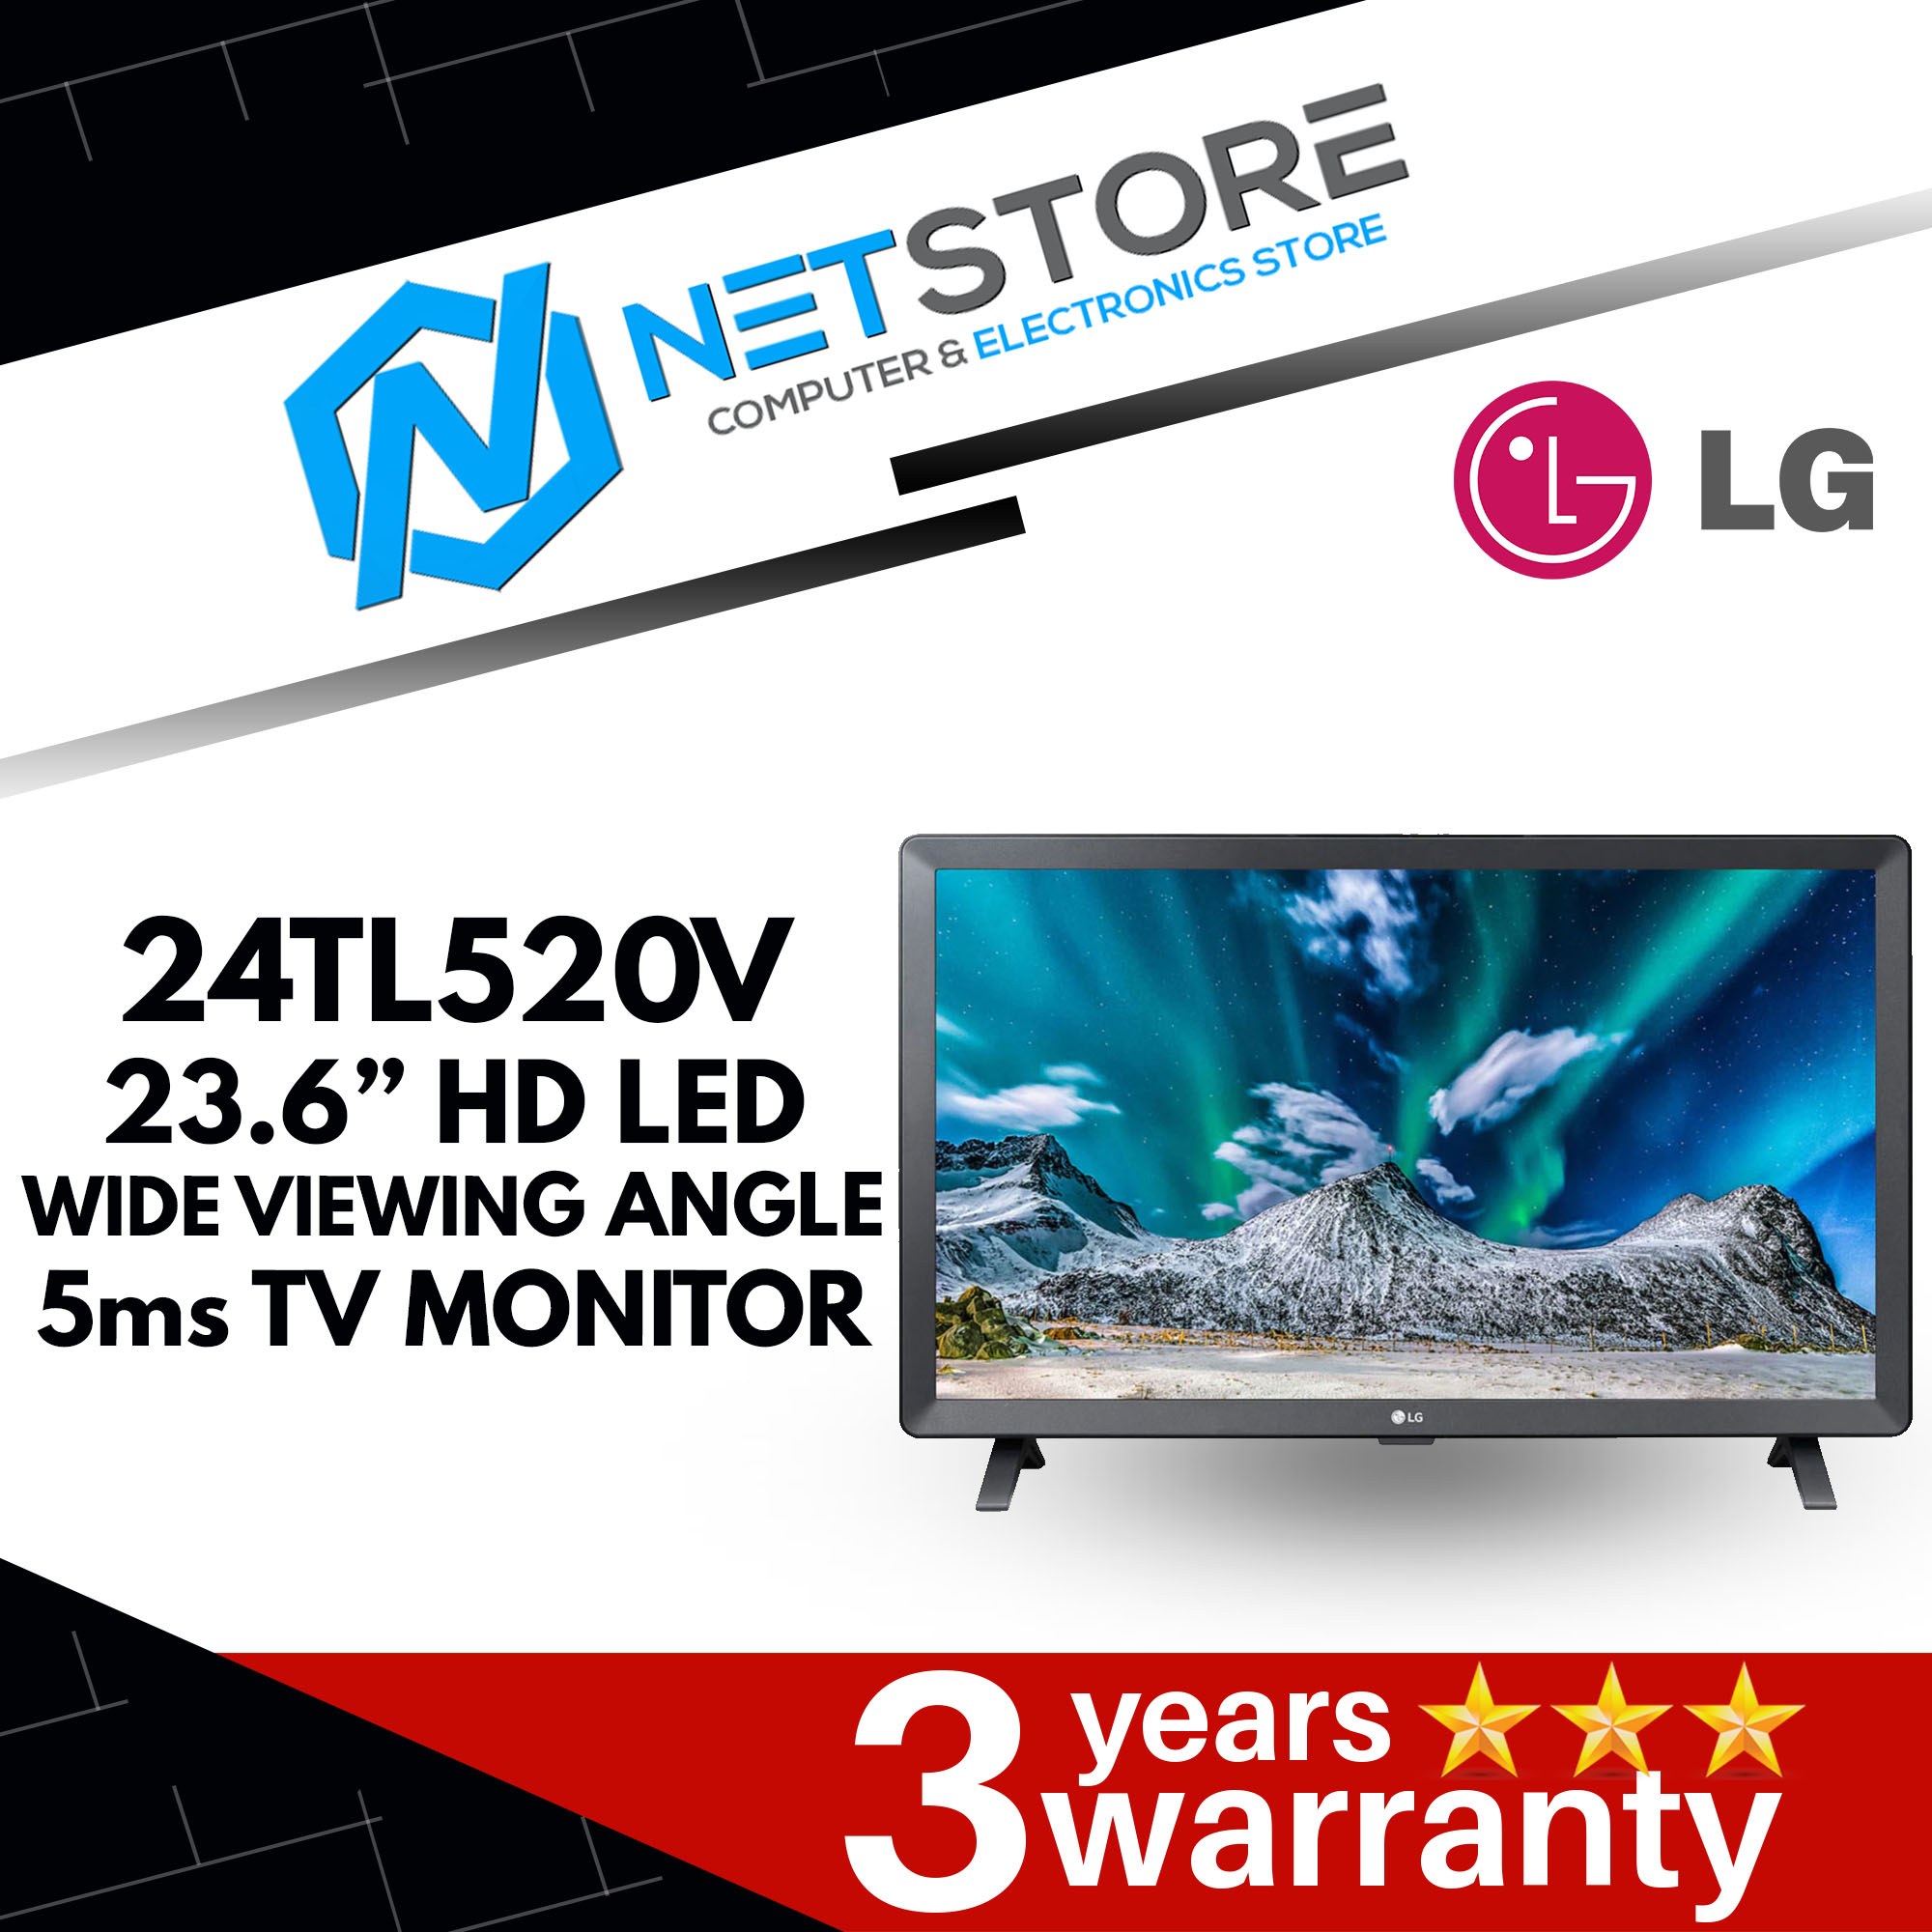 LG 24TL520V 23.6&#8221; HD LED WIDE VIEWING ANGLE 5ms TV MONITOR